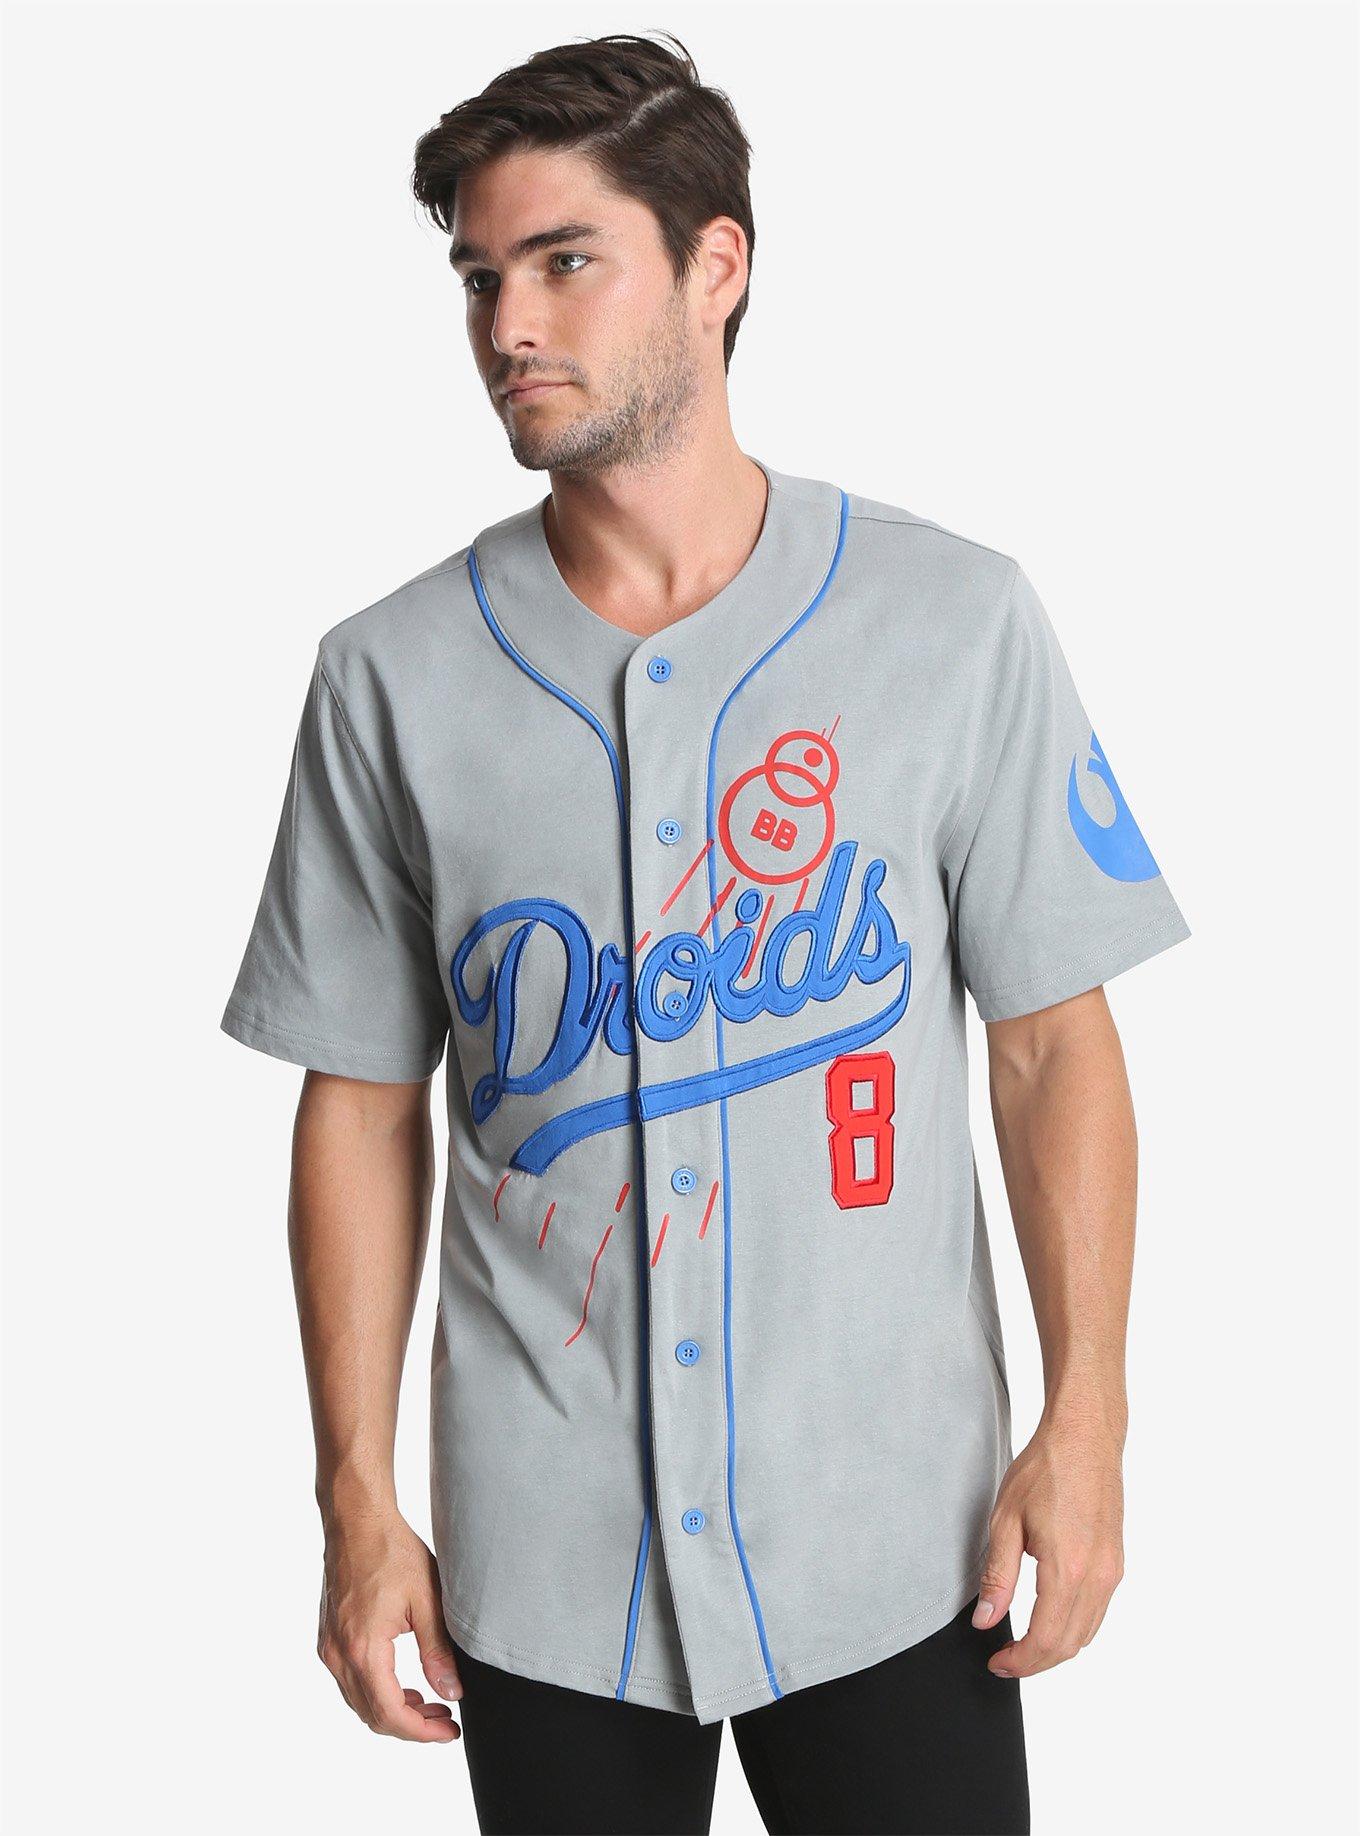 Hello Kitty Customized Dodgers Baseball jersey Women's Sizes Small And  Large